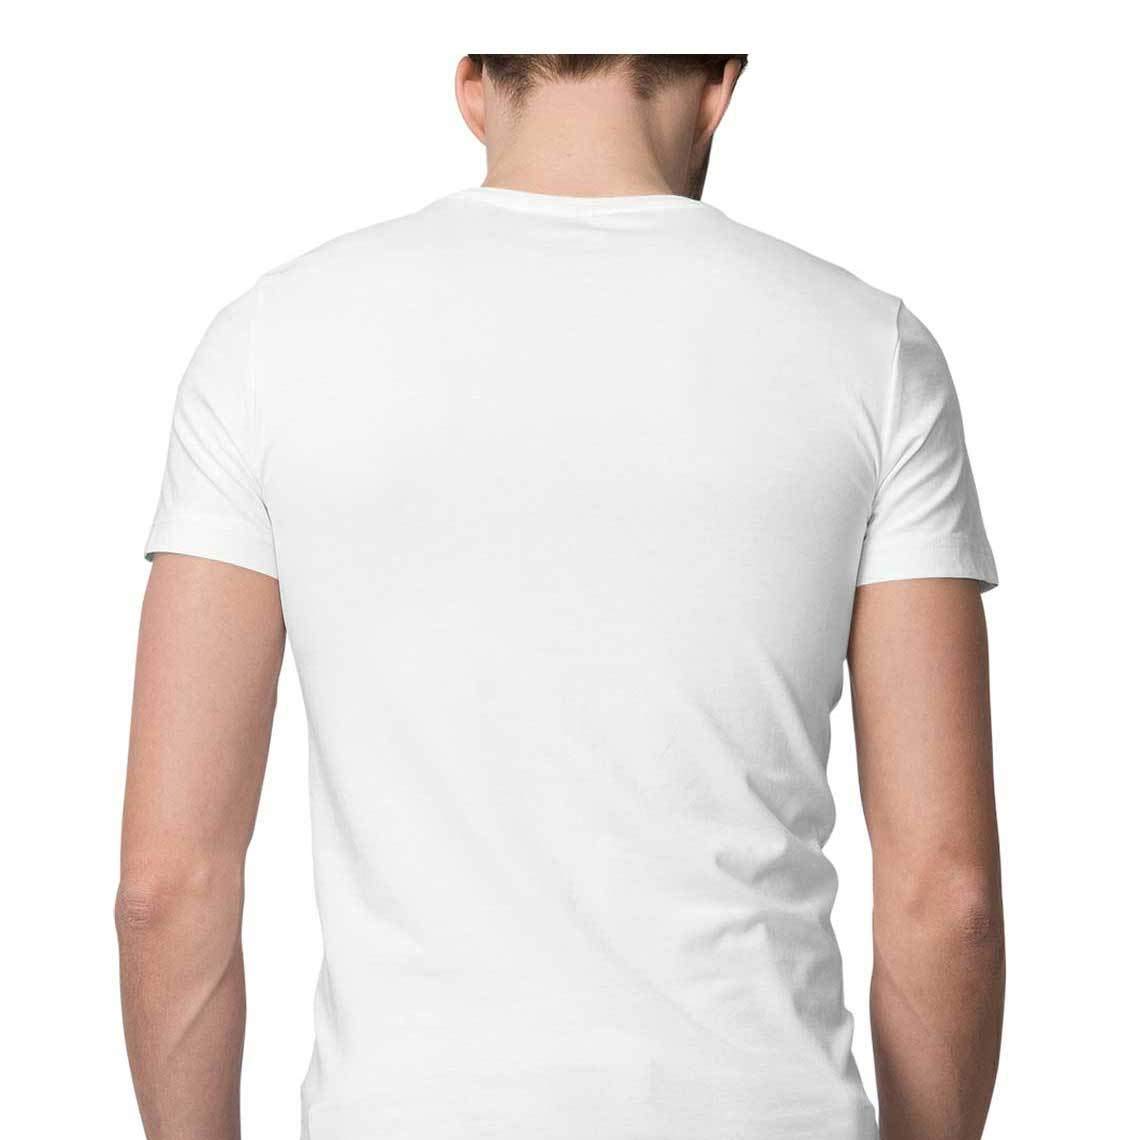 Fathers day Printed Tshirt for Men|Graphic Printed White t shirts for dads| worlds best father